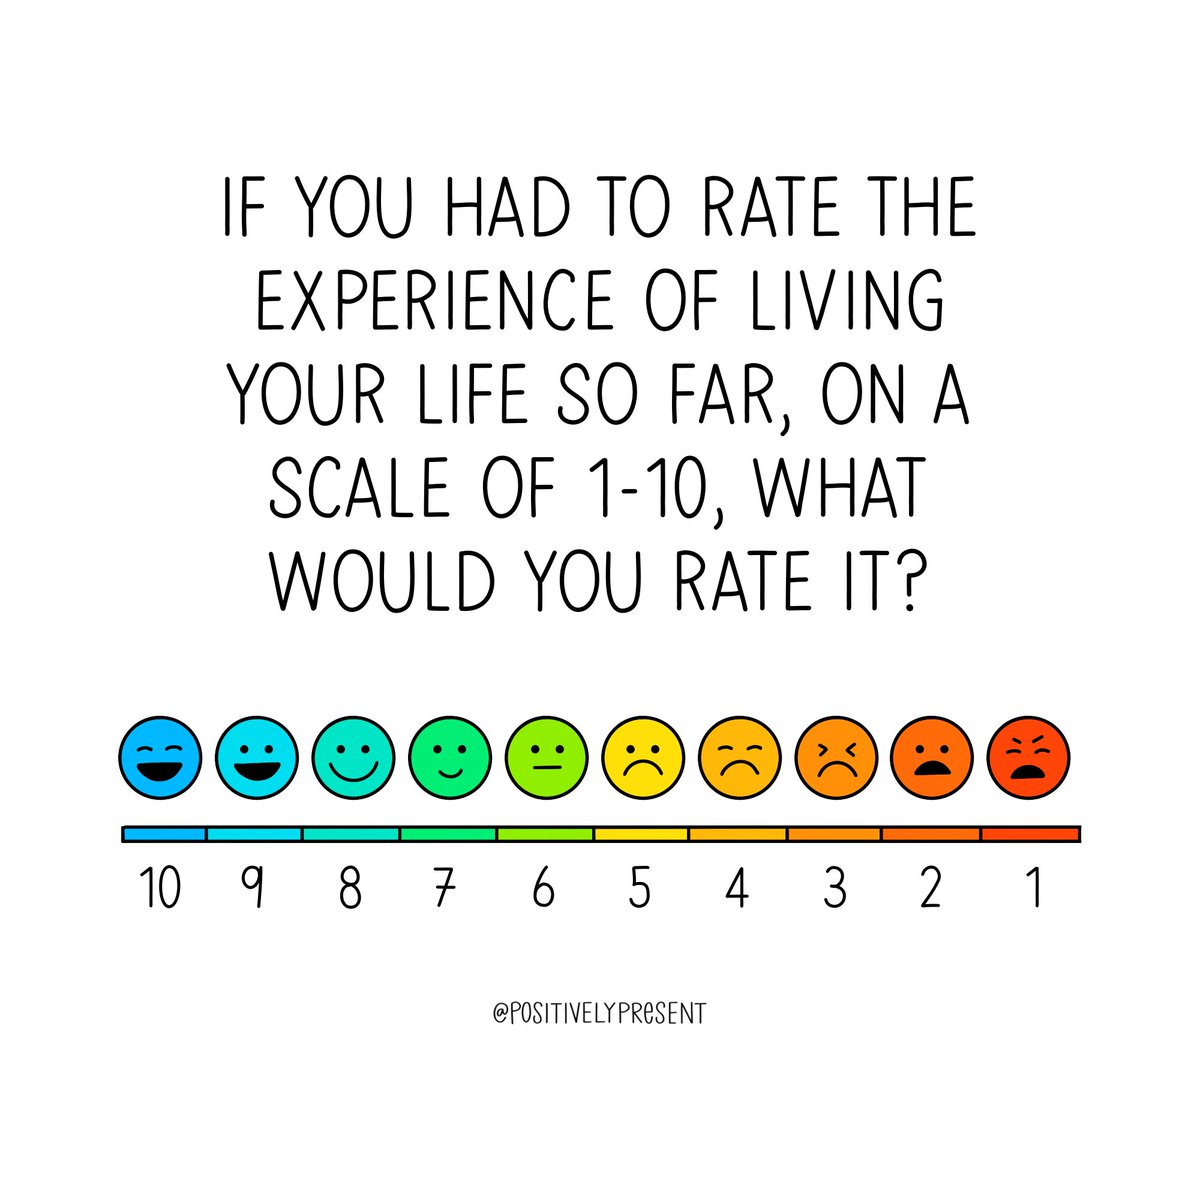 What would you rate the experience of your life?